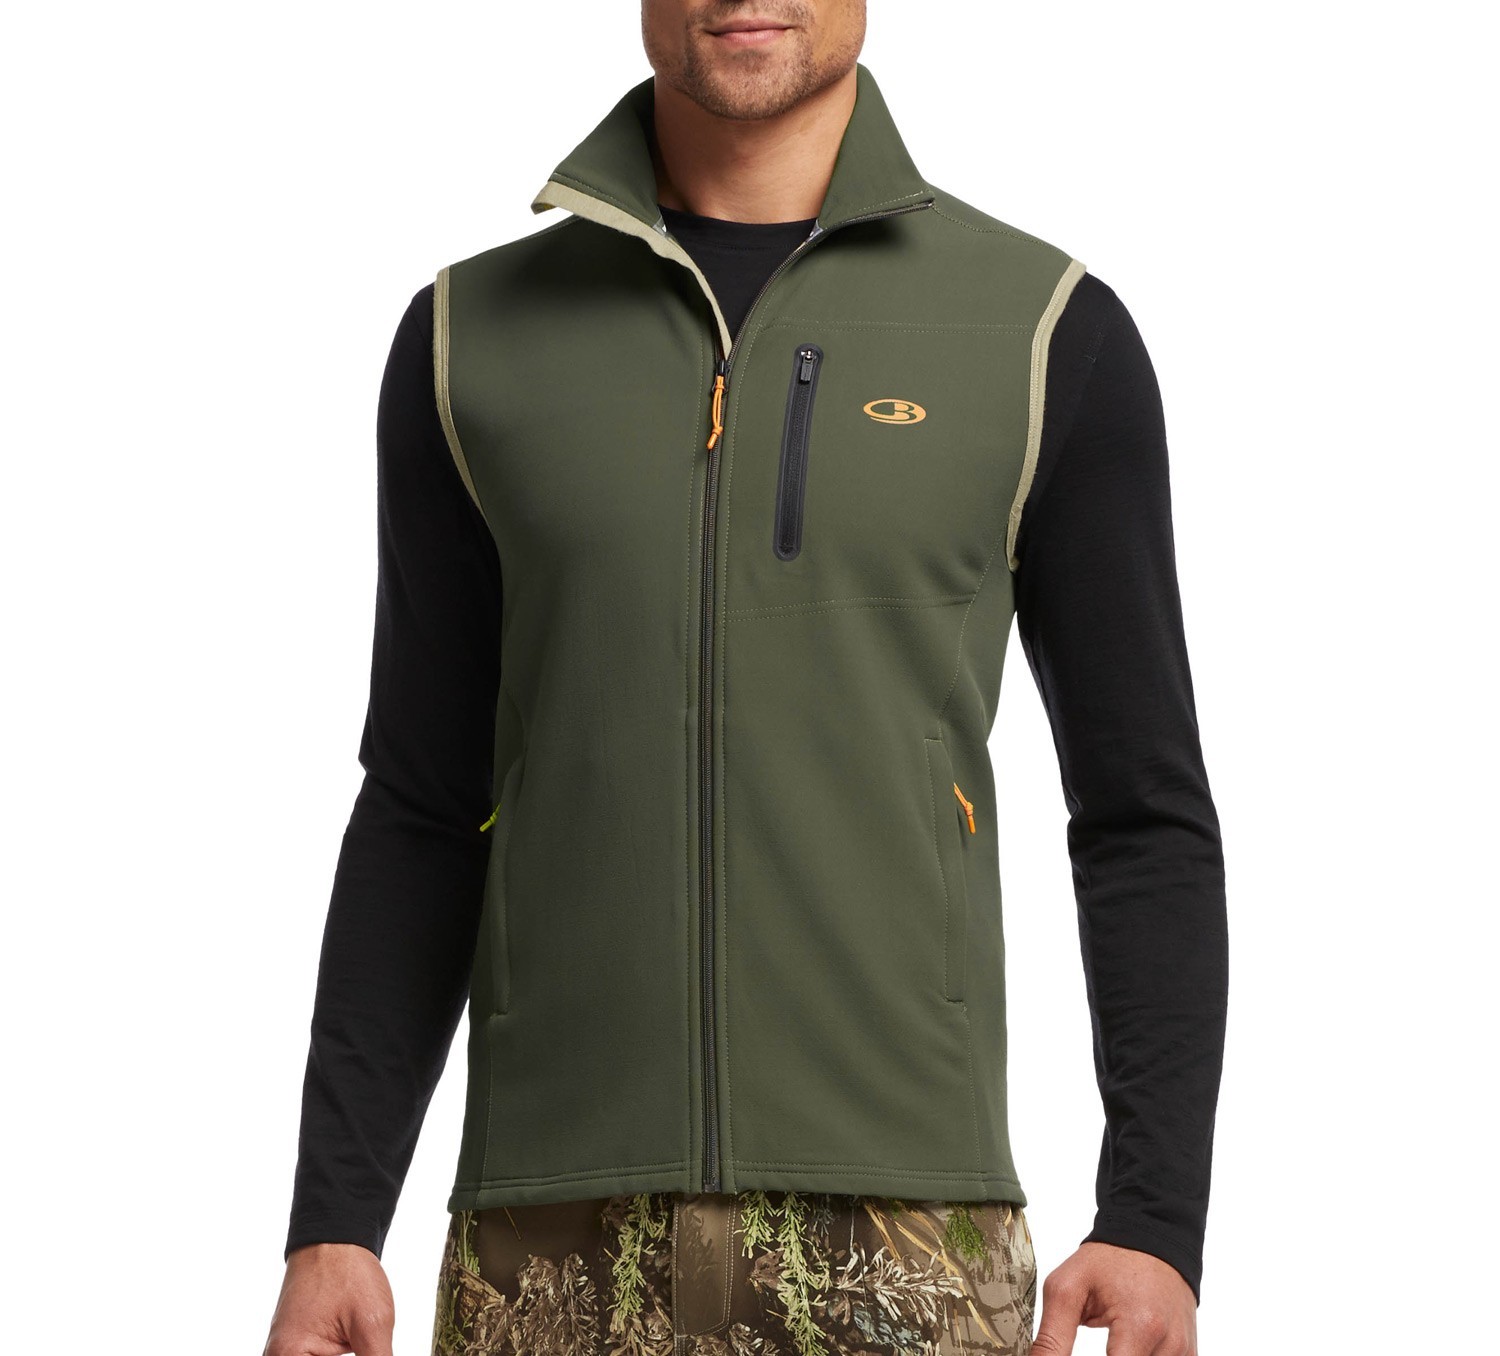 Gilet mérinos Icebreaker Ika - Gilets de chasse | Made in Chasse